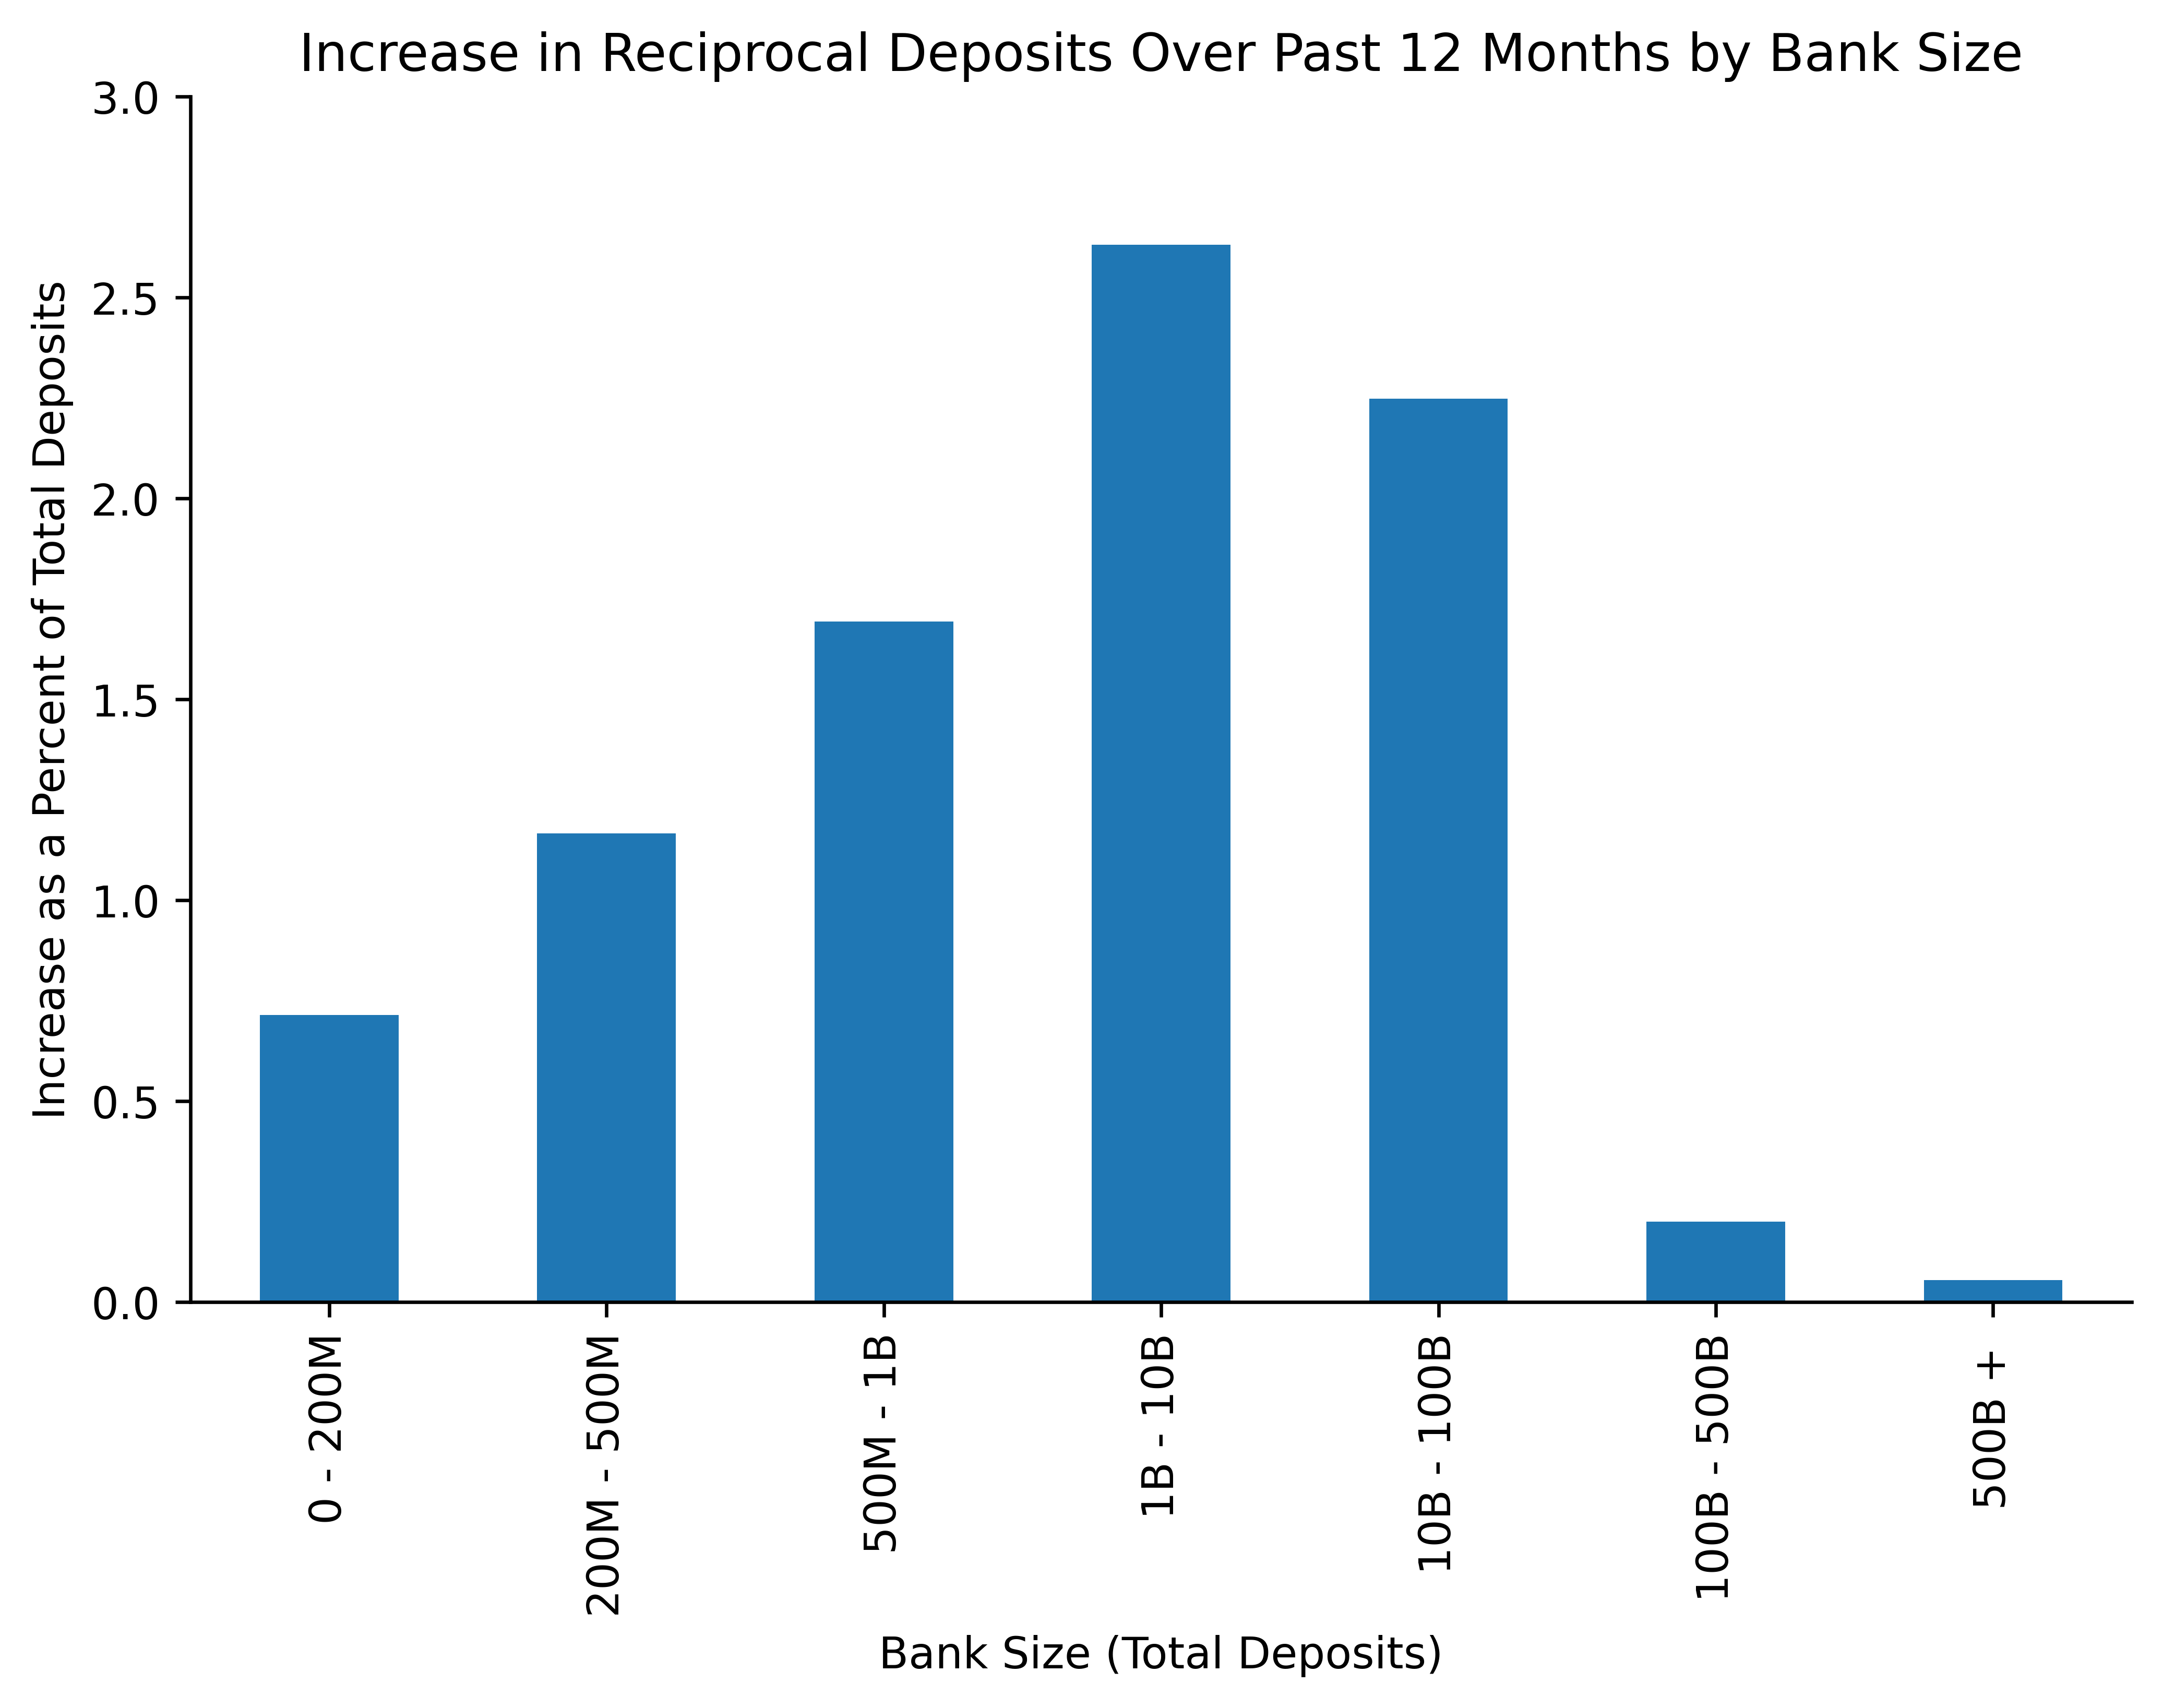 Mid-Size and Regional Banks Utilize Reciprocal Deposits for